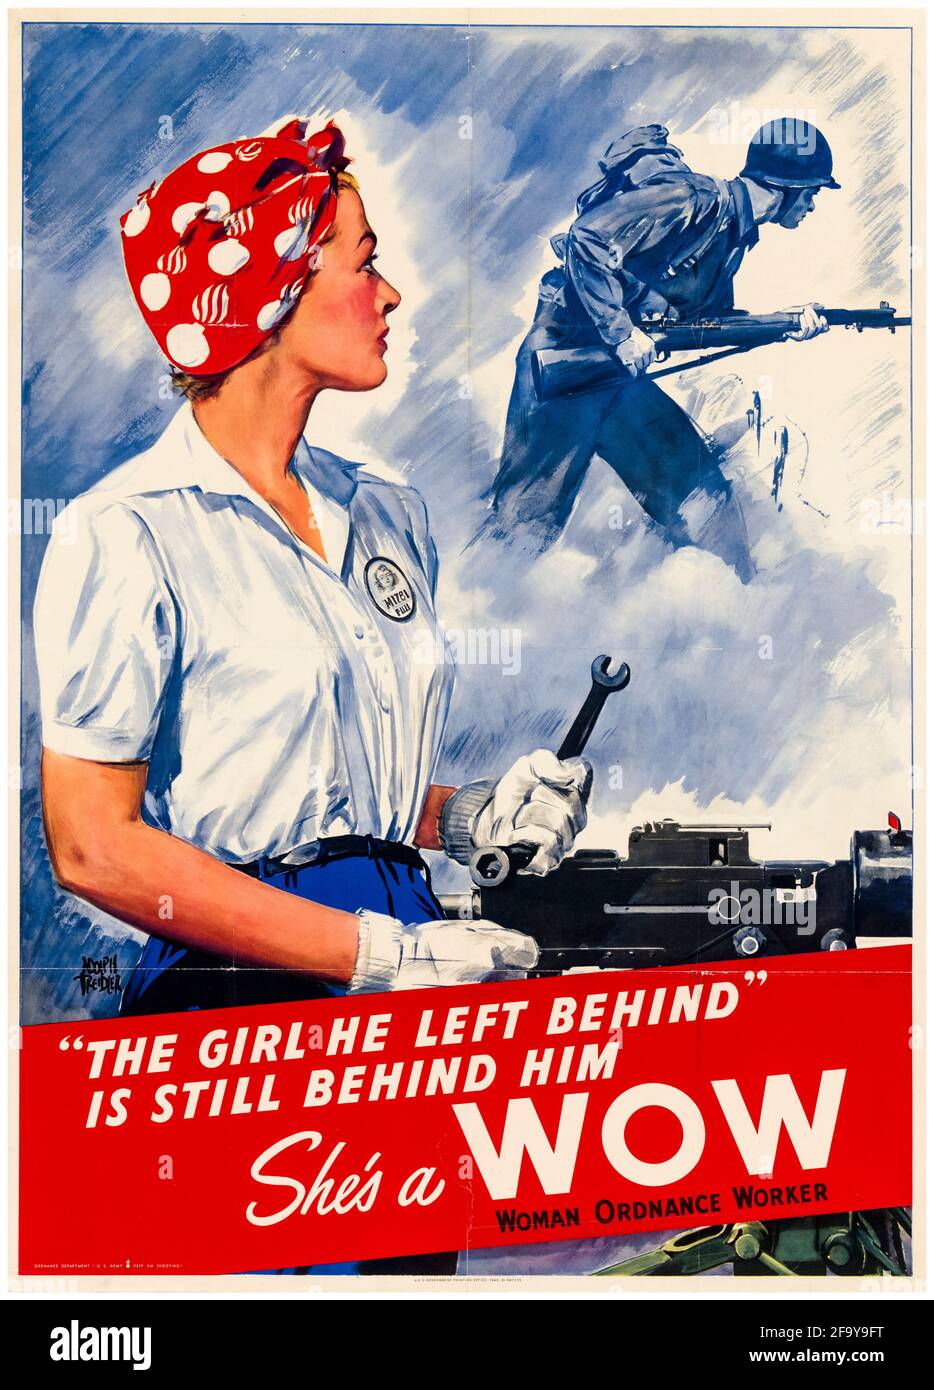 US-Amerikanerin, Kriegsposter aus dem 2. Weltkrieg, She's a WOW (Woman Ordnance Worker), (Woman doing Manufacturing work in a Factory), 1942-1945 Stockfoto